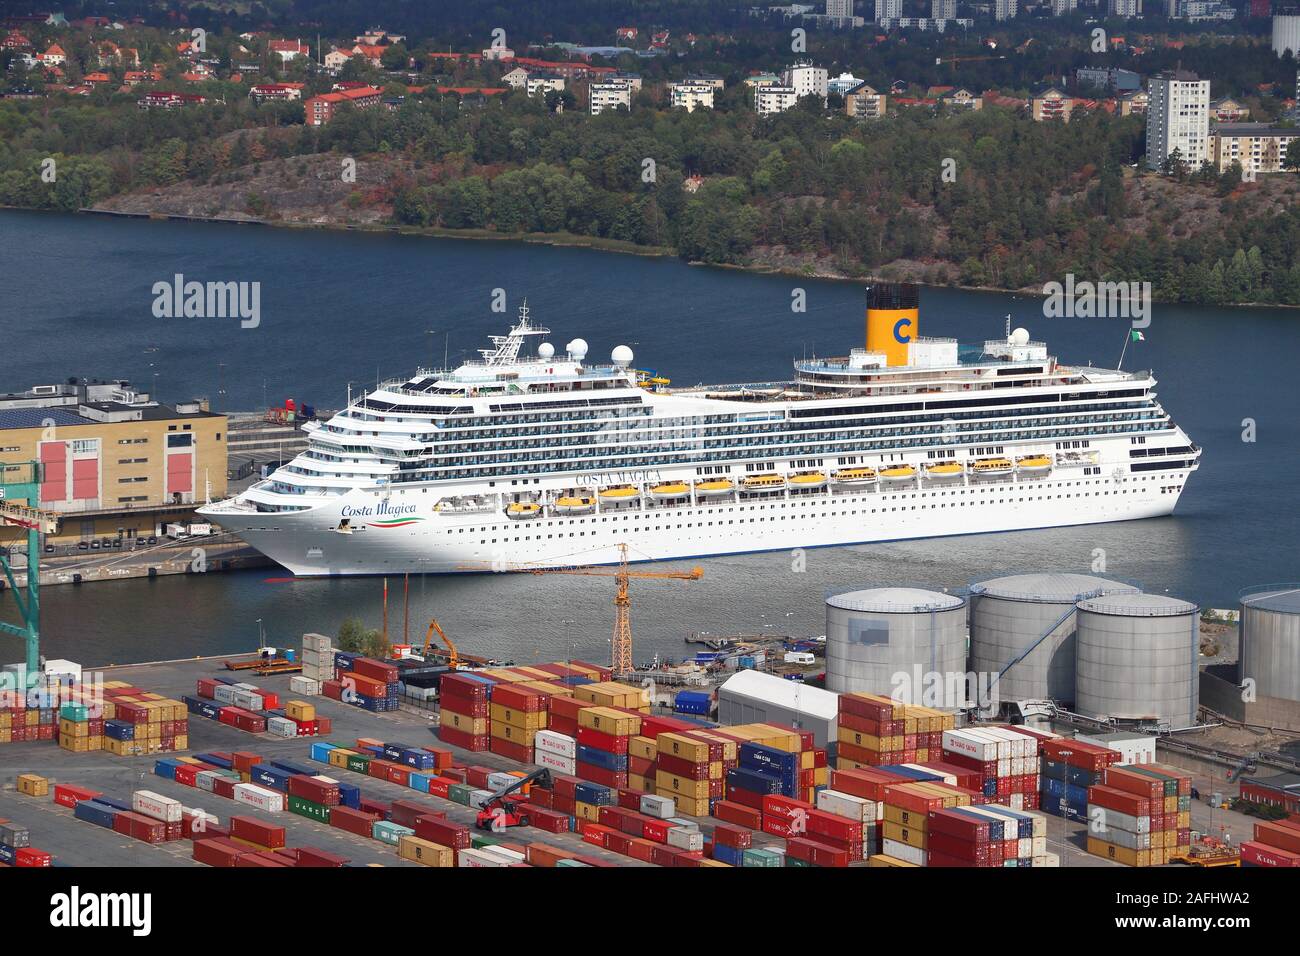 STOCKHOLM, SWEDEN - AUGUST 24, 2018: Costa Magica ship at Stockholm harbor, Sweden. Costa Cruises is part of Carnival Corporation. Stock Photo